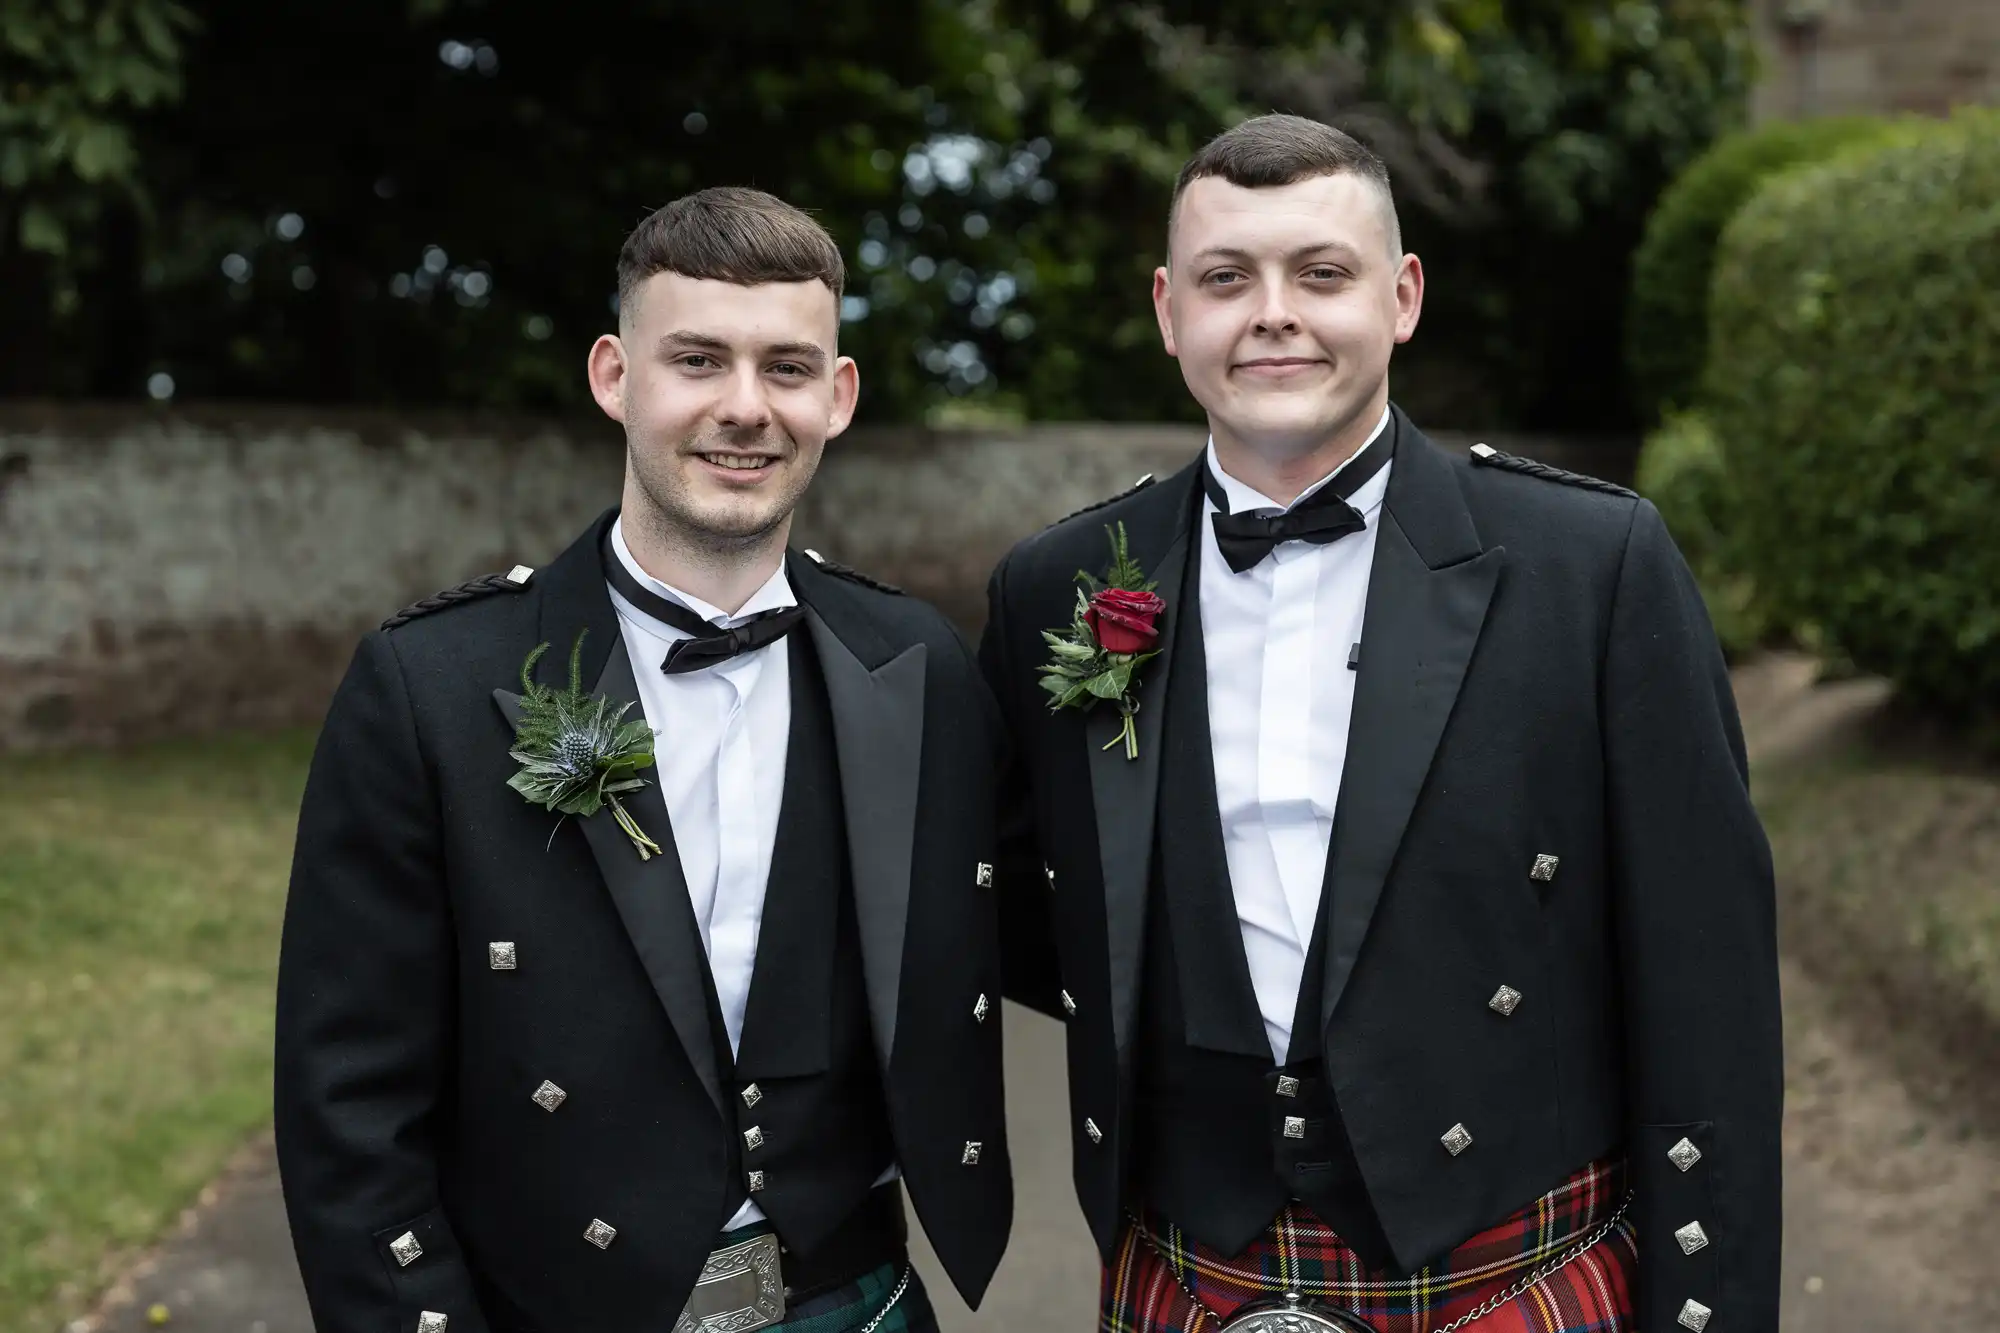 Two men in Scottish attire with kilts and jackets, smiling at a formal outdoor event.